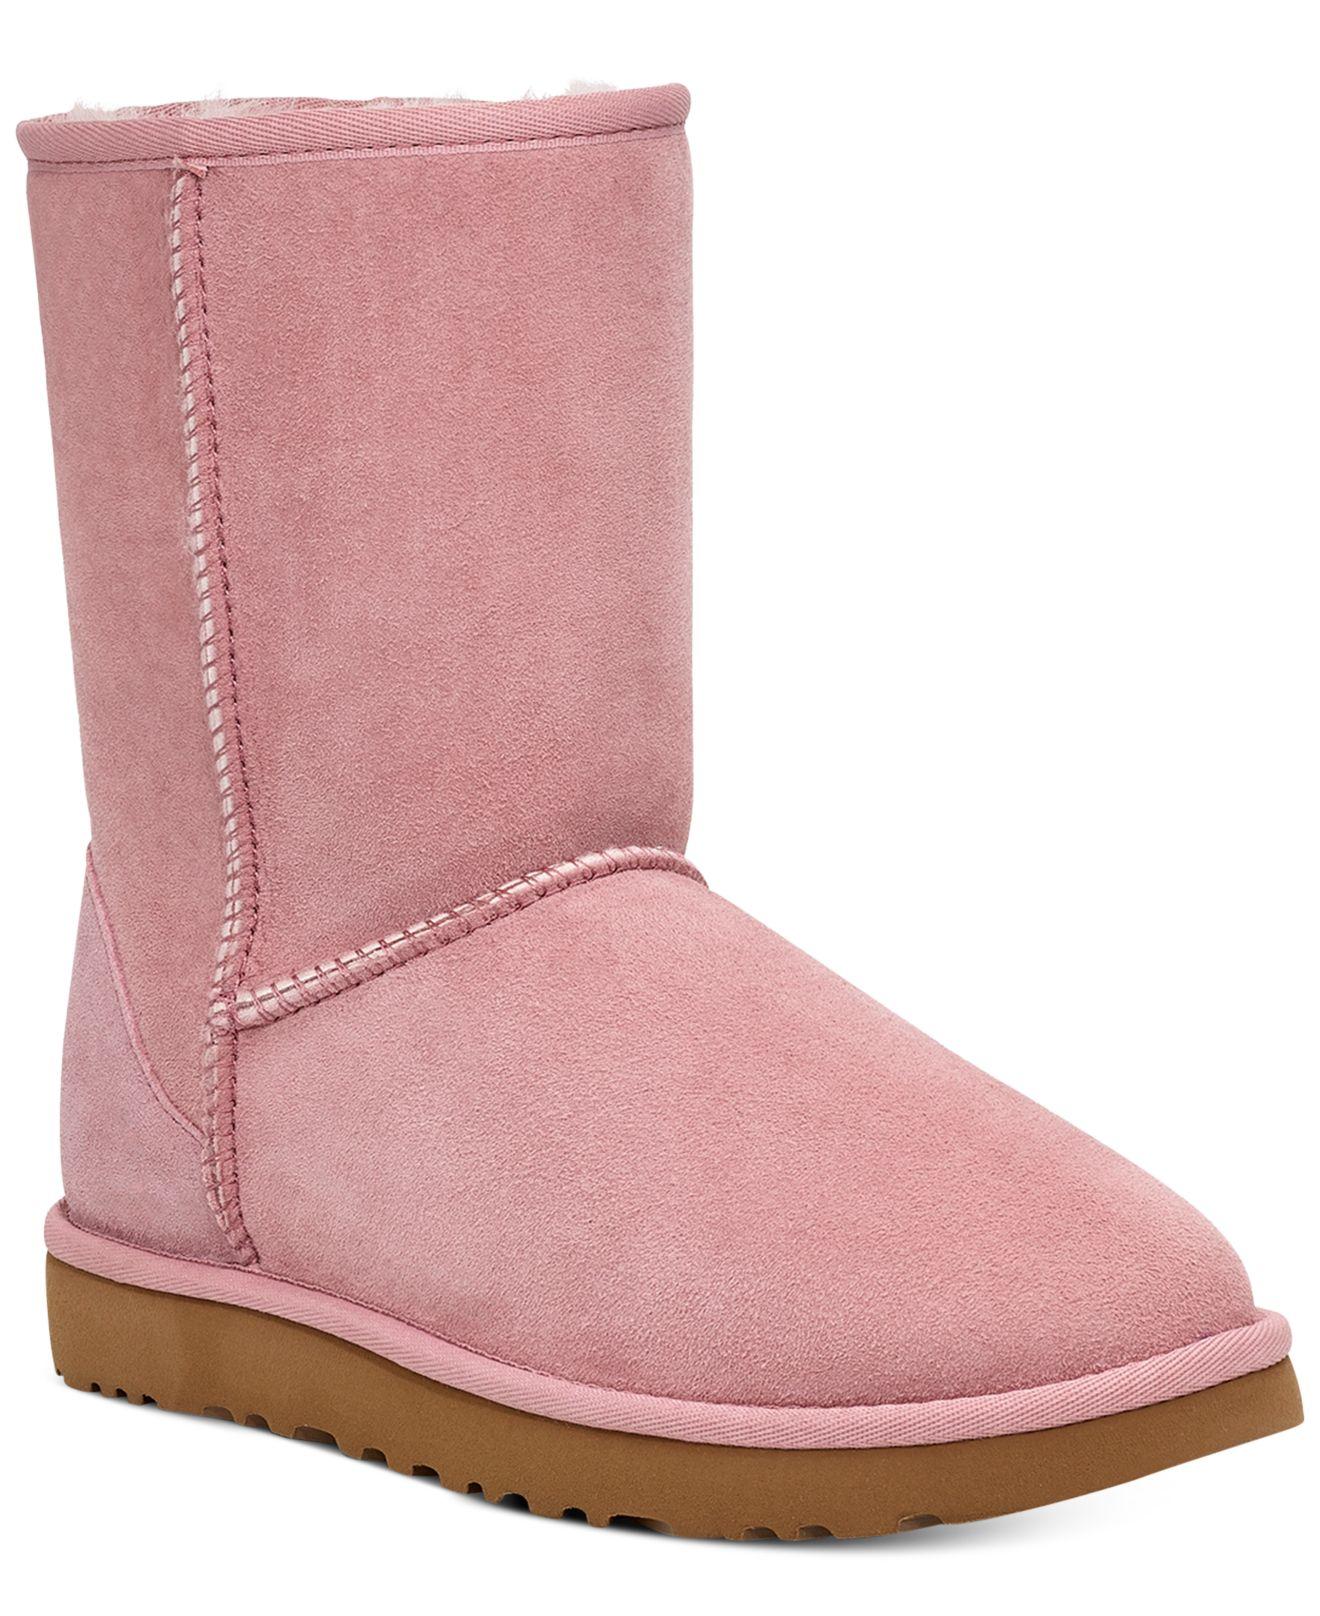 UGG Fur Classic Ii Genuine Shearling Lined Short Boots in Pink Crystal ...